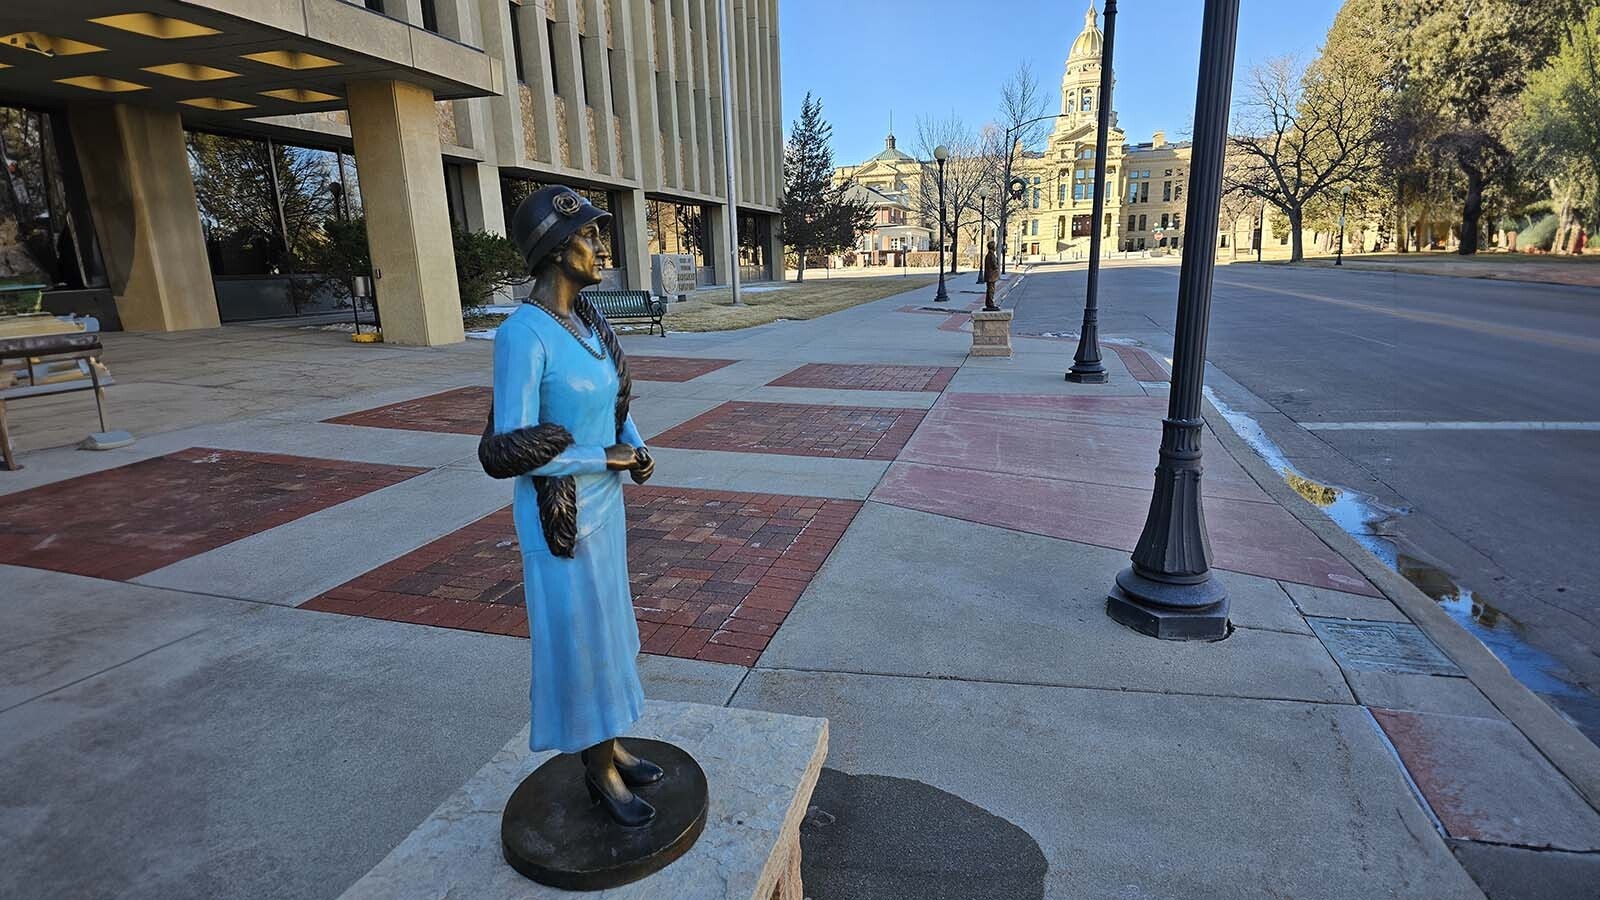 Nellie Tayloe Ross, first female Wyoming governor, looks sharp as if about to turn and walk to Wyoming’s state Capitol in the background.